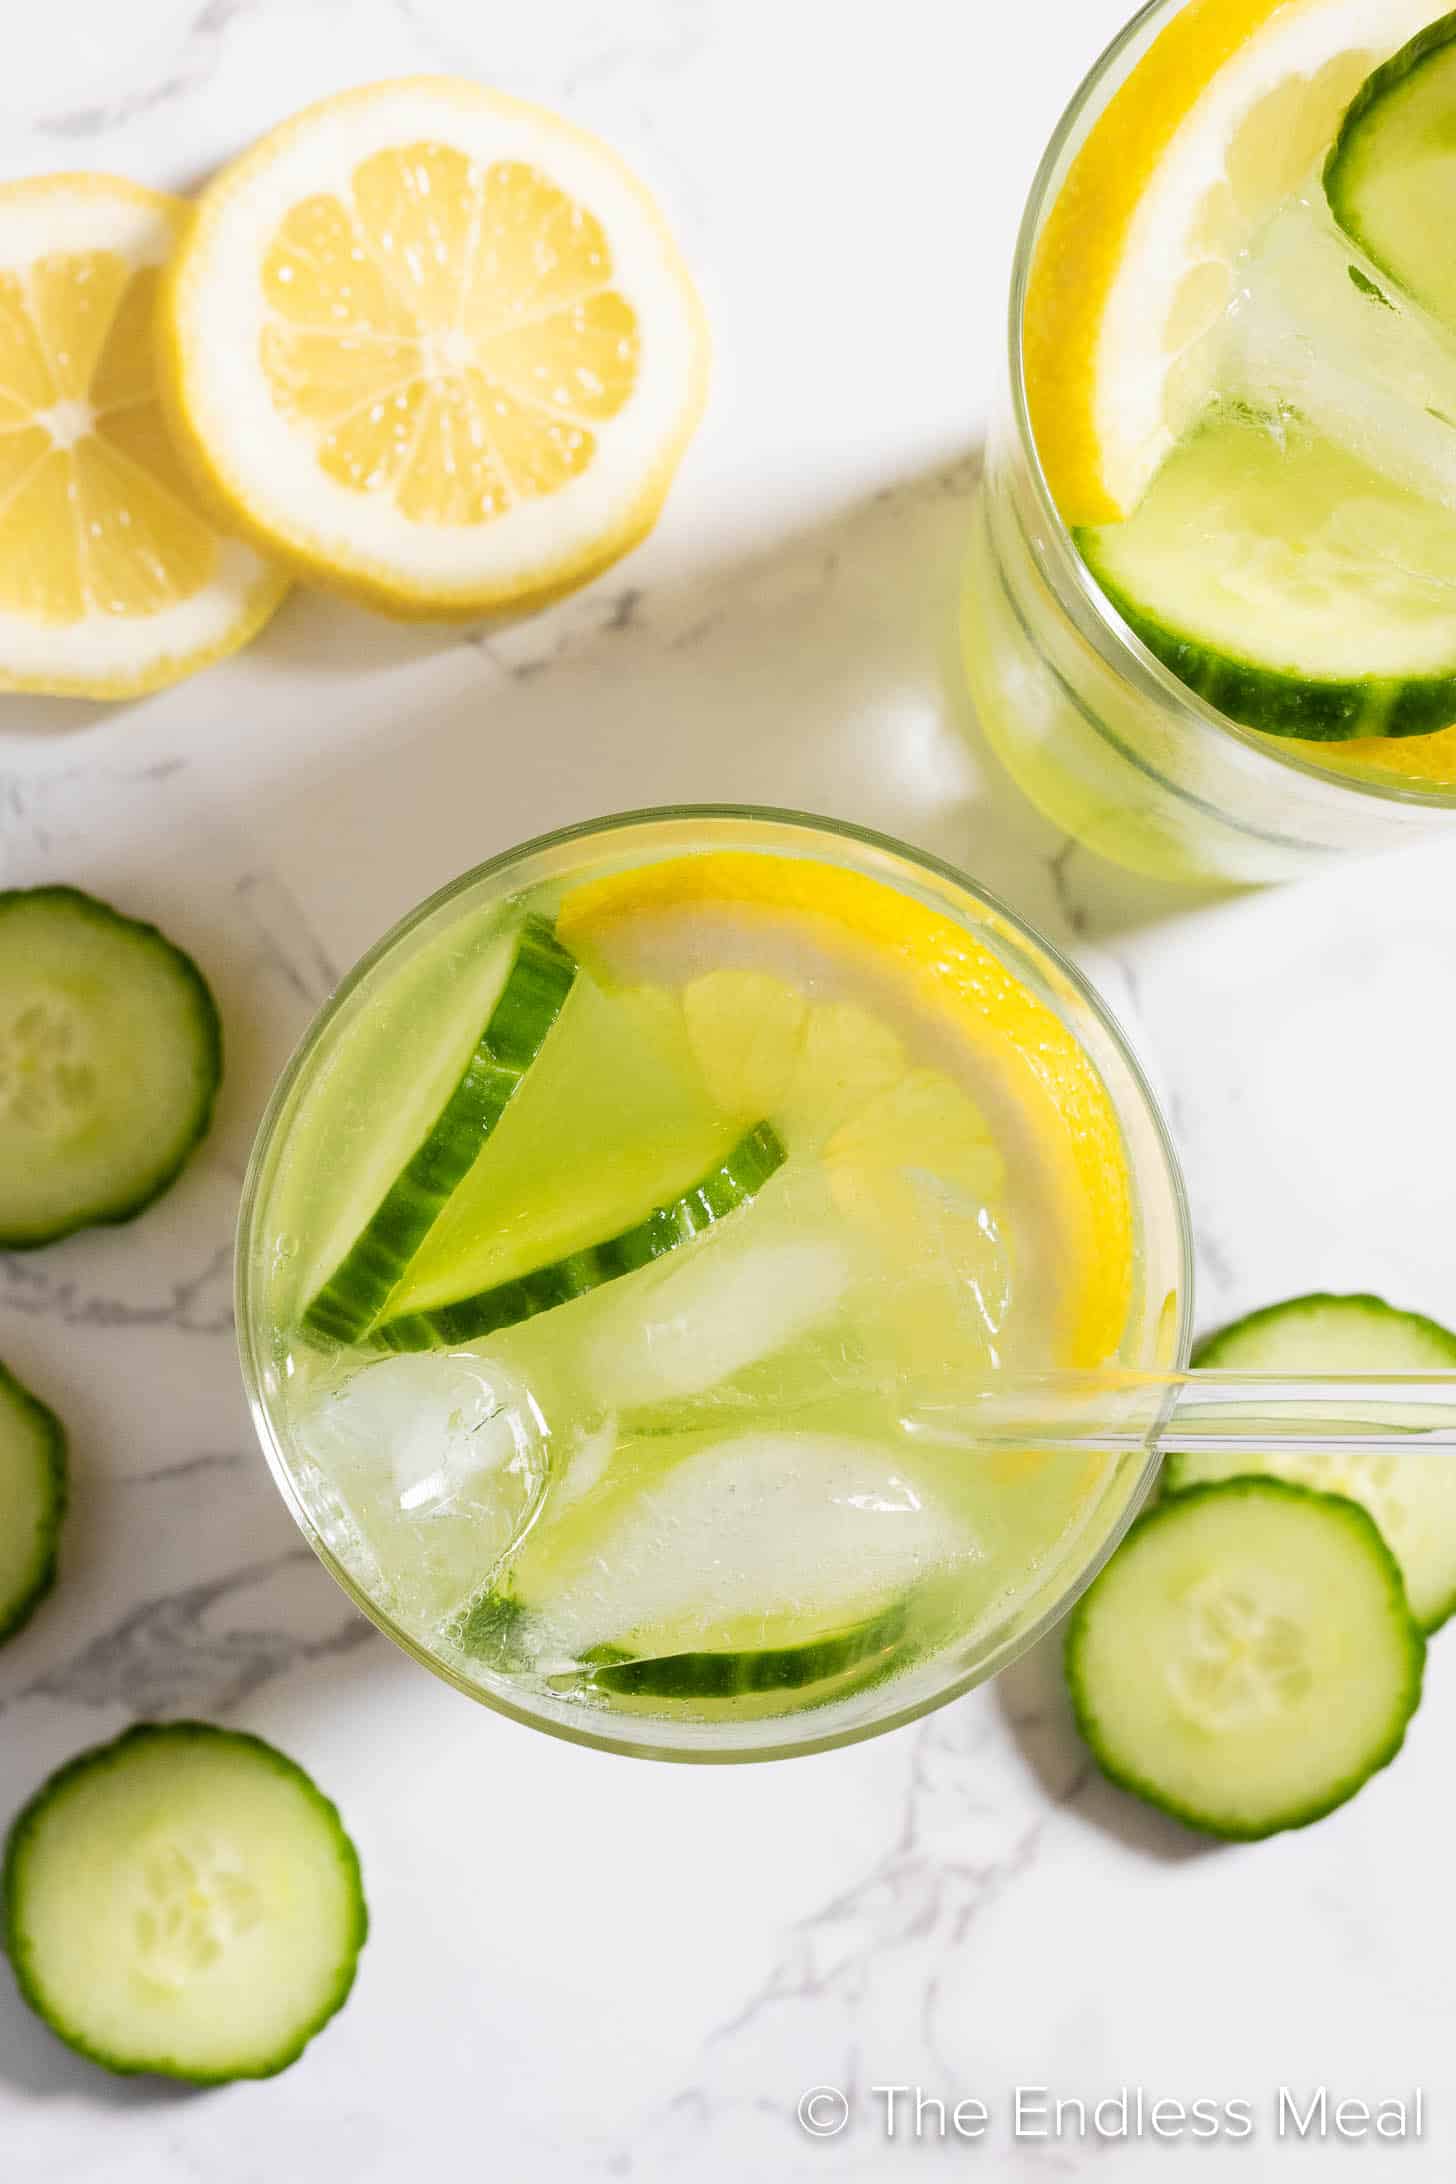 Looking down on glasses of lemonade with cucumbers.